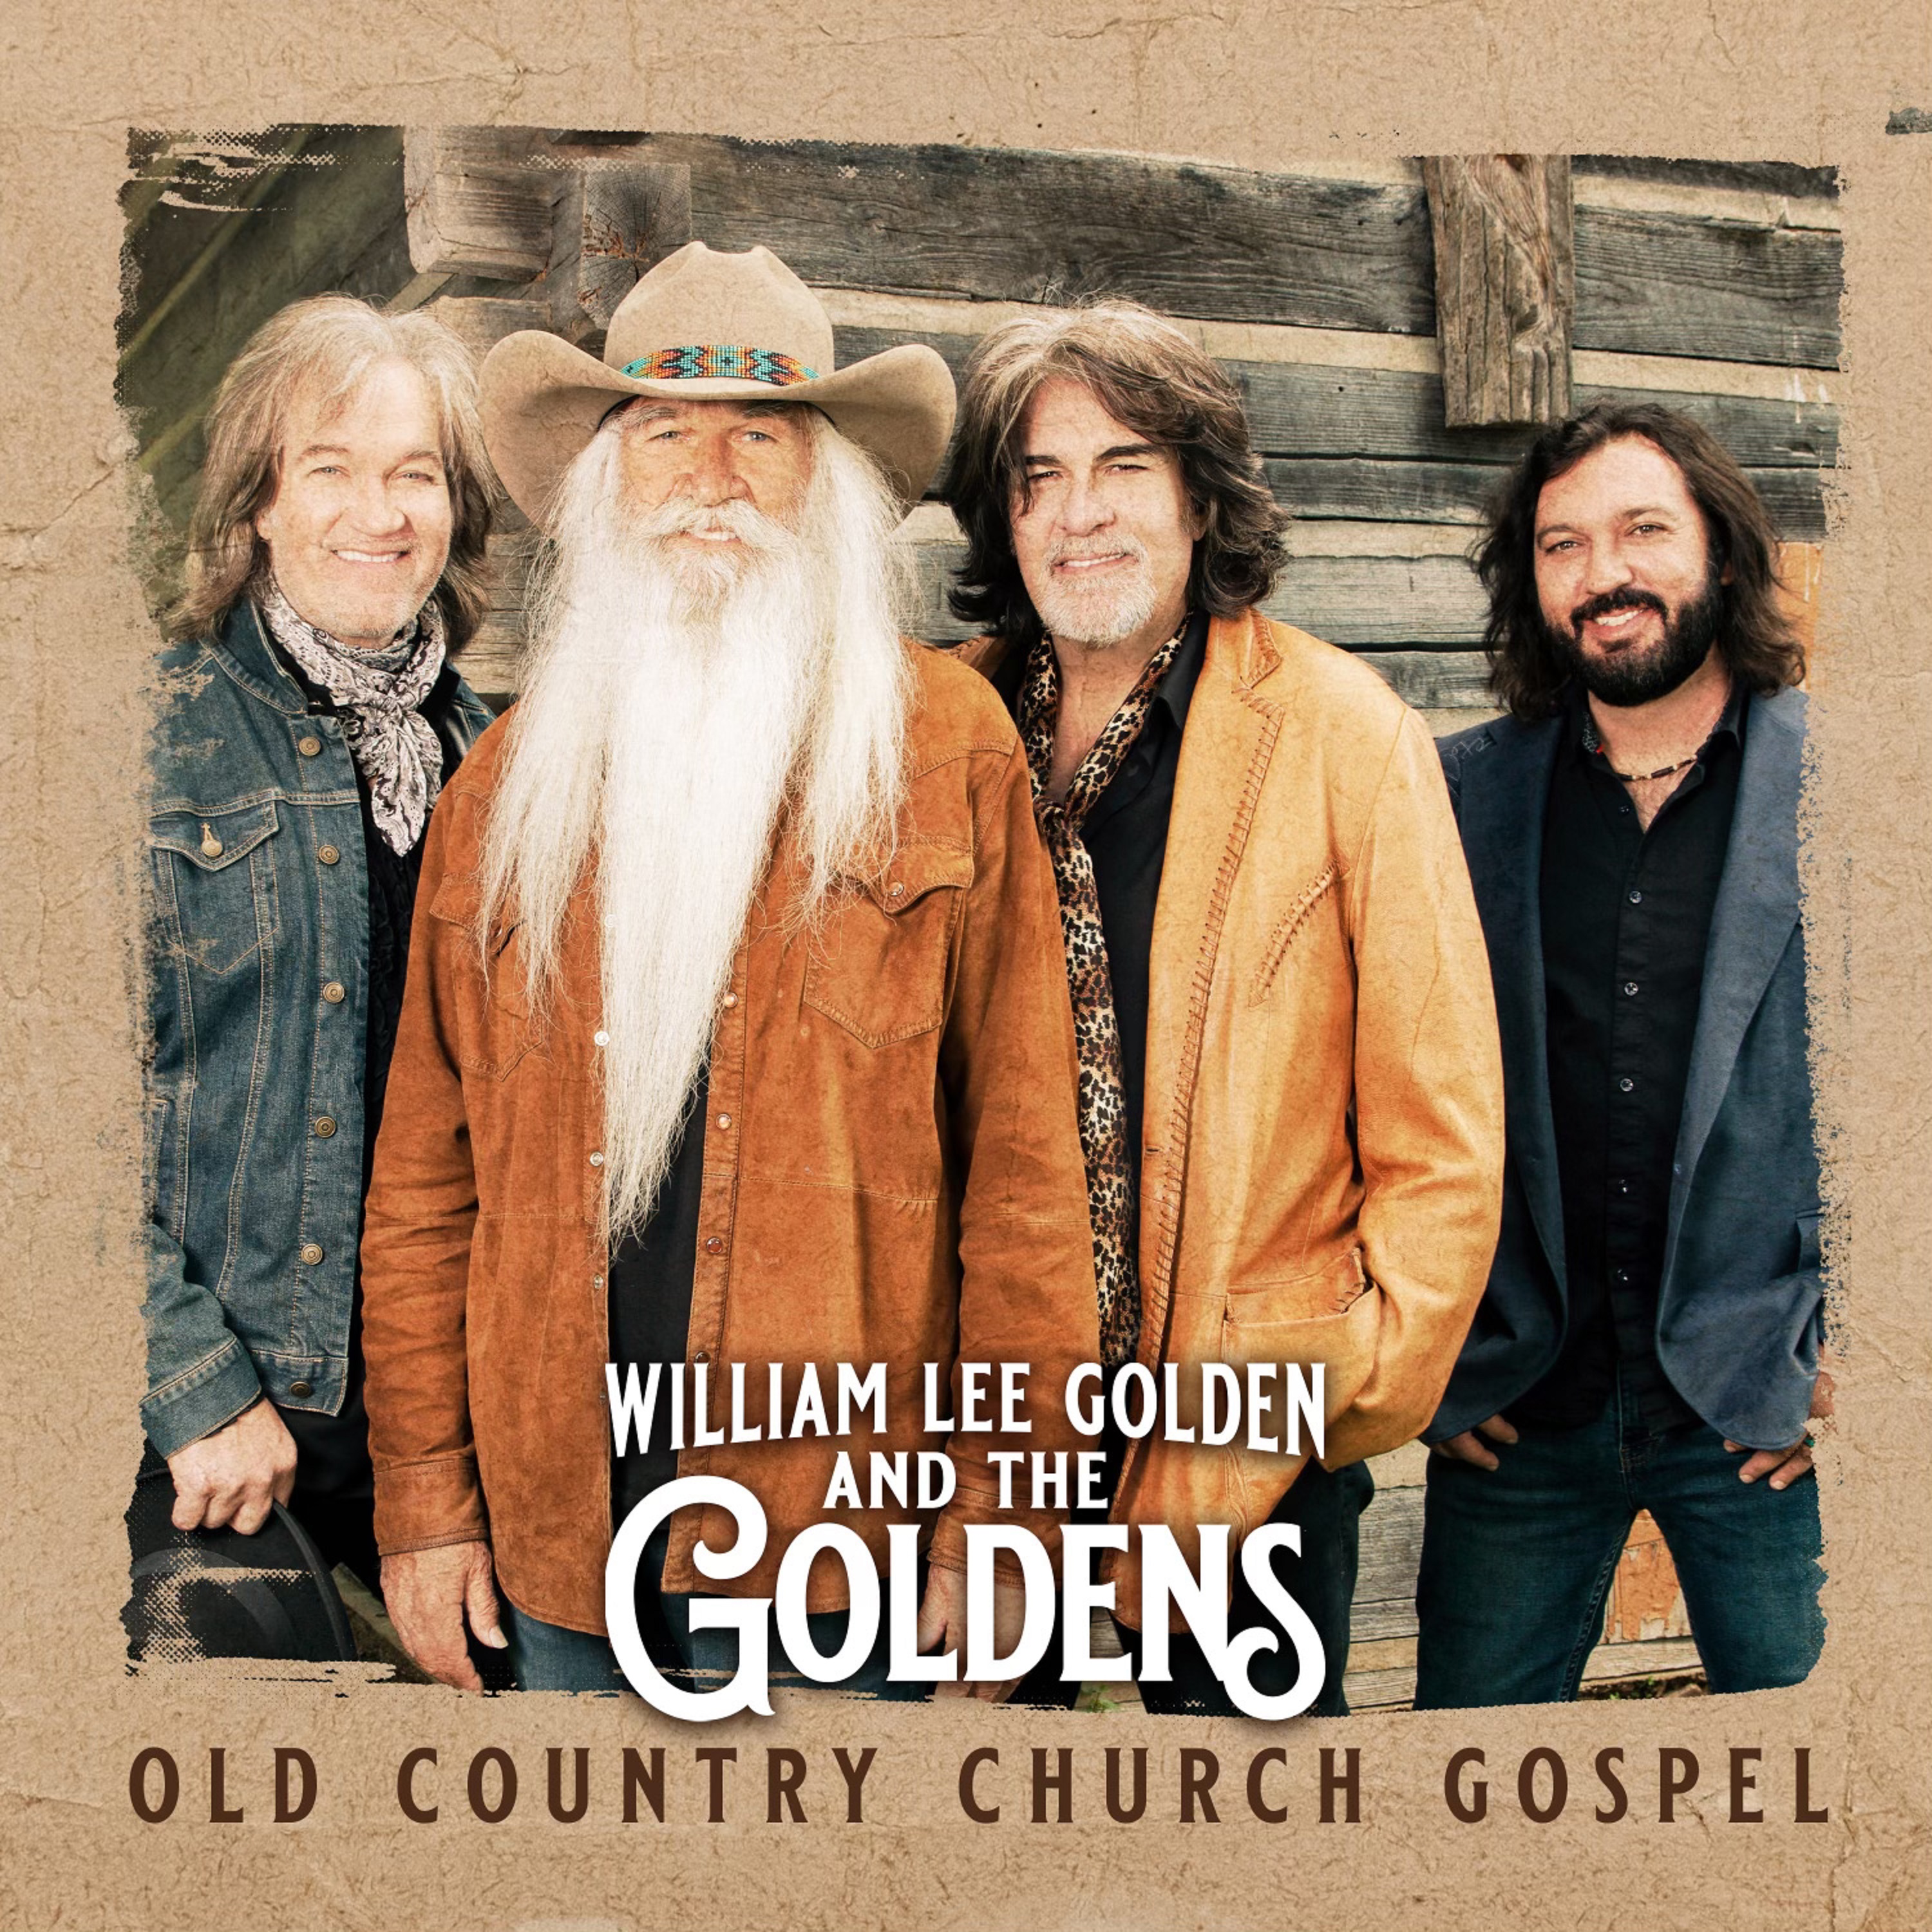 William Lee Golden and The Goldens Celebrate Success of Single "Come And Dine"